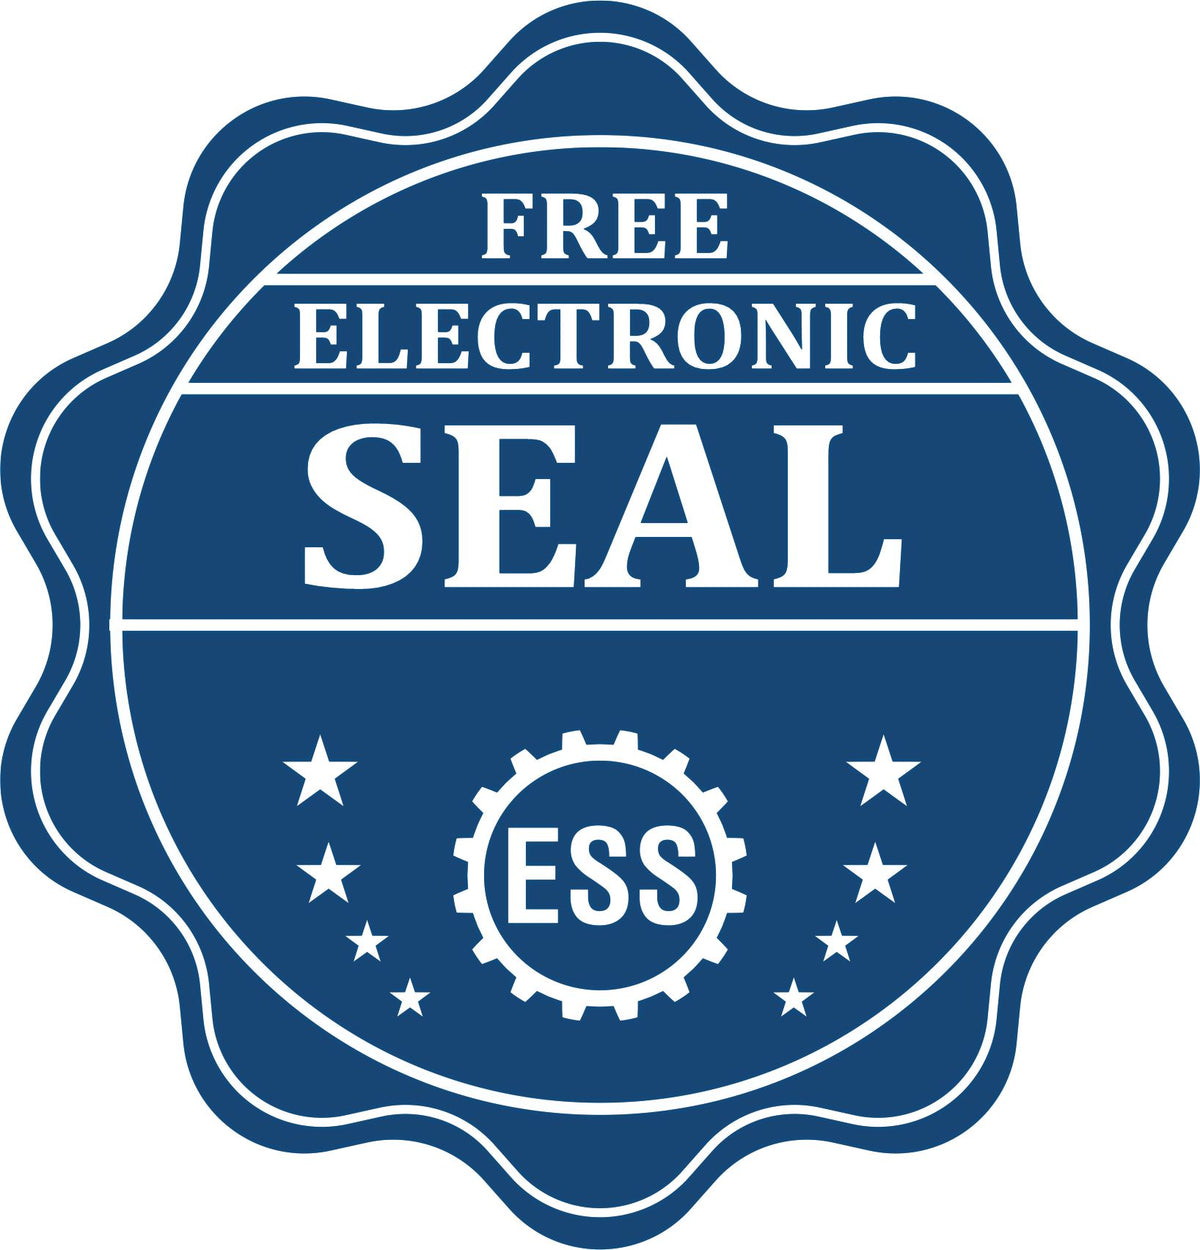 A badge showing a free electronic seal for the Alaska Desk Architect Embossing Seal with stars and the ESS gear on the emblem.